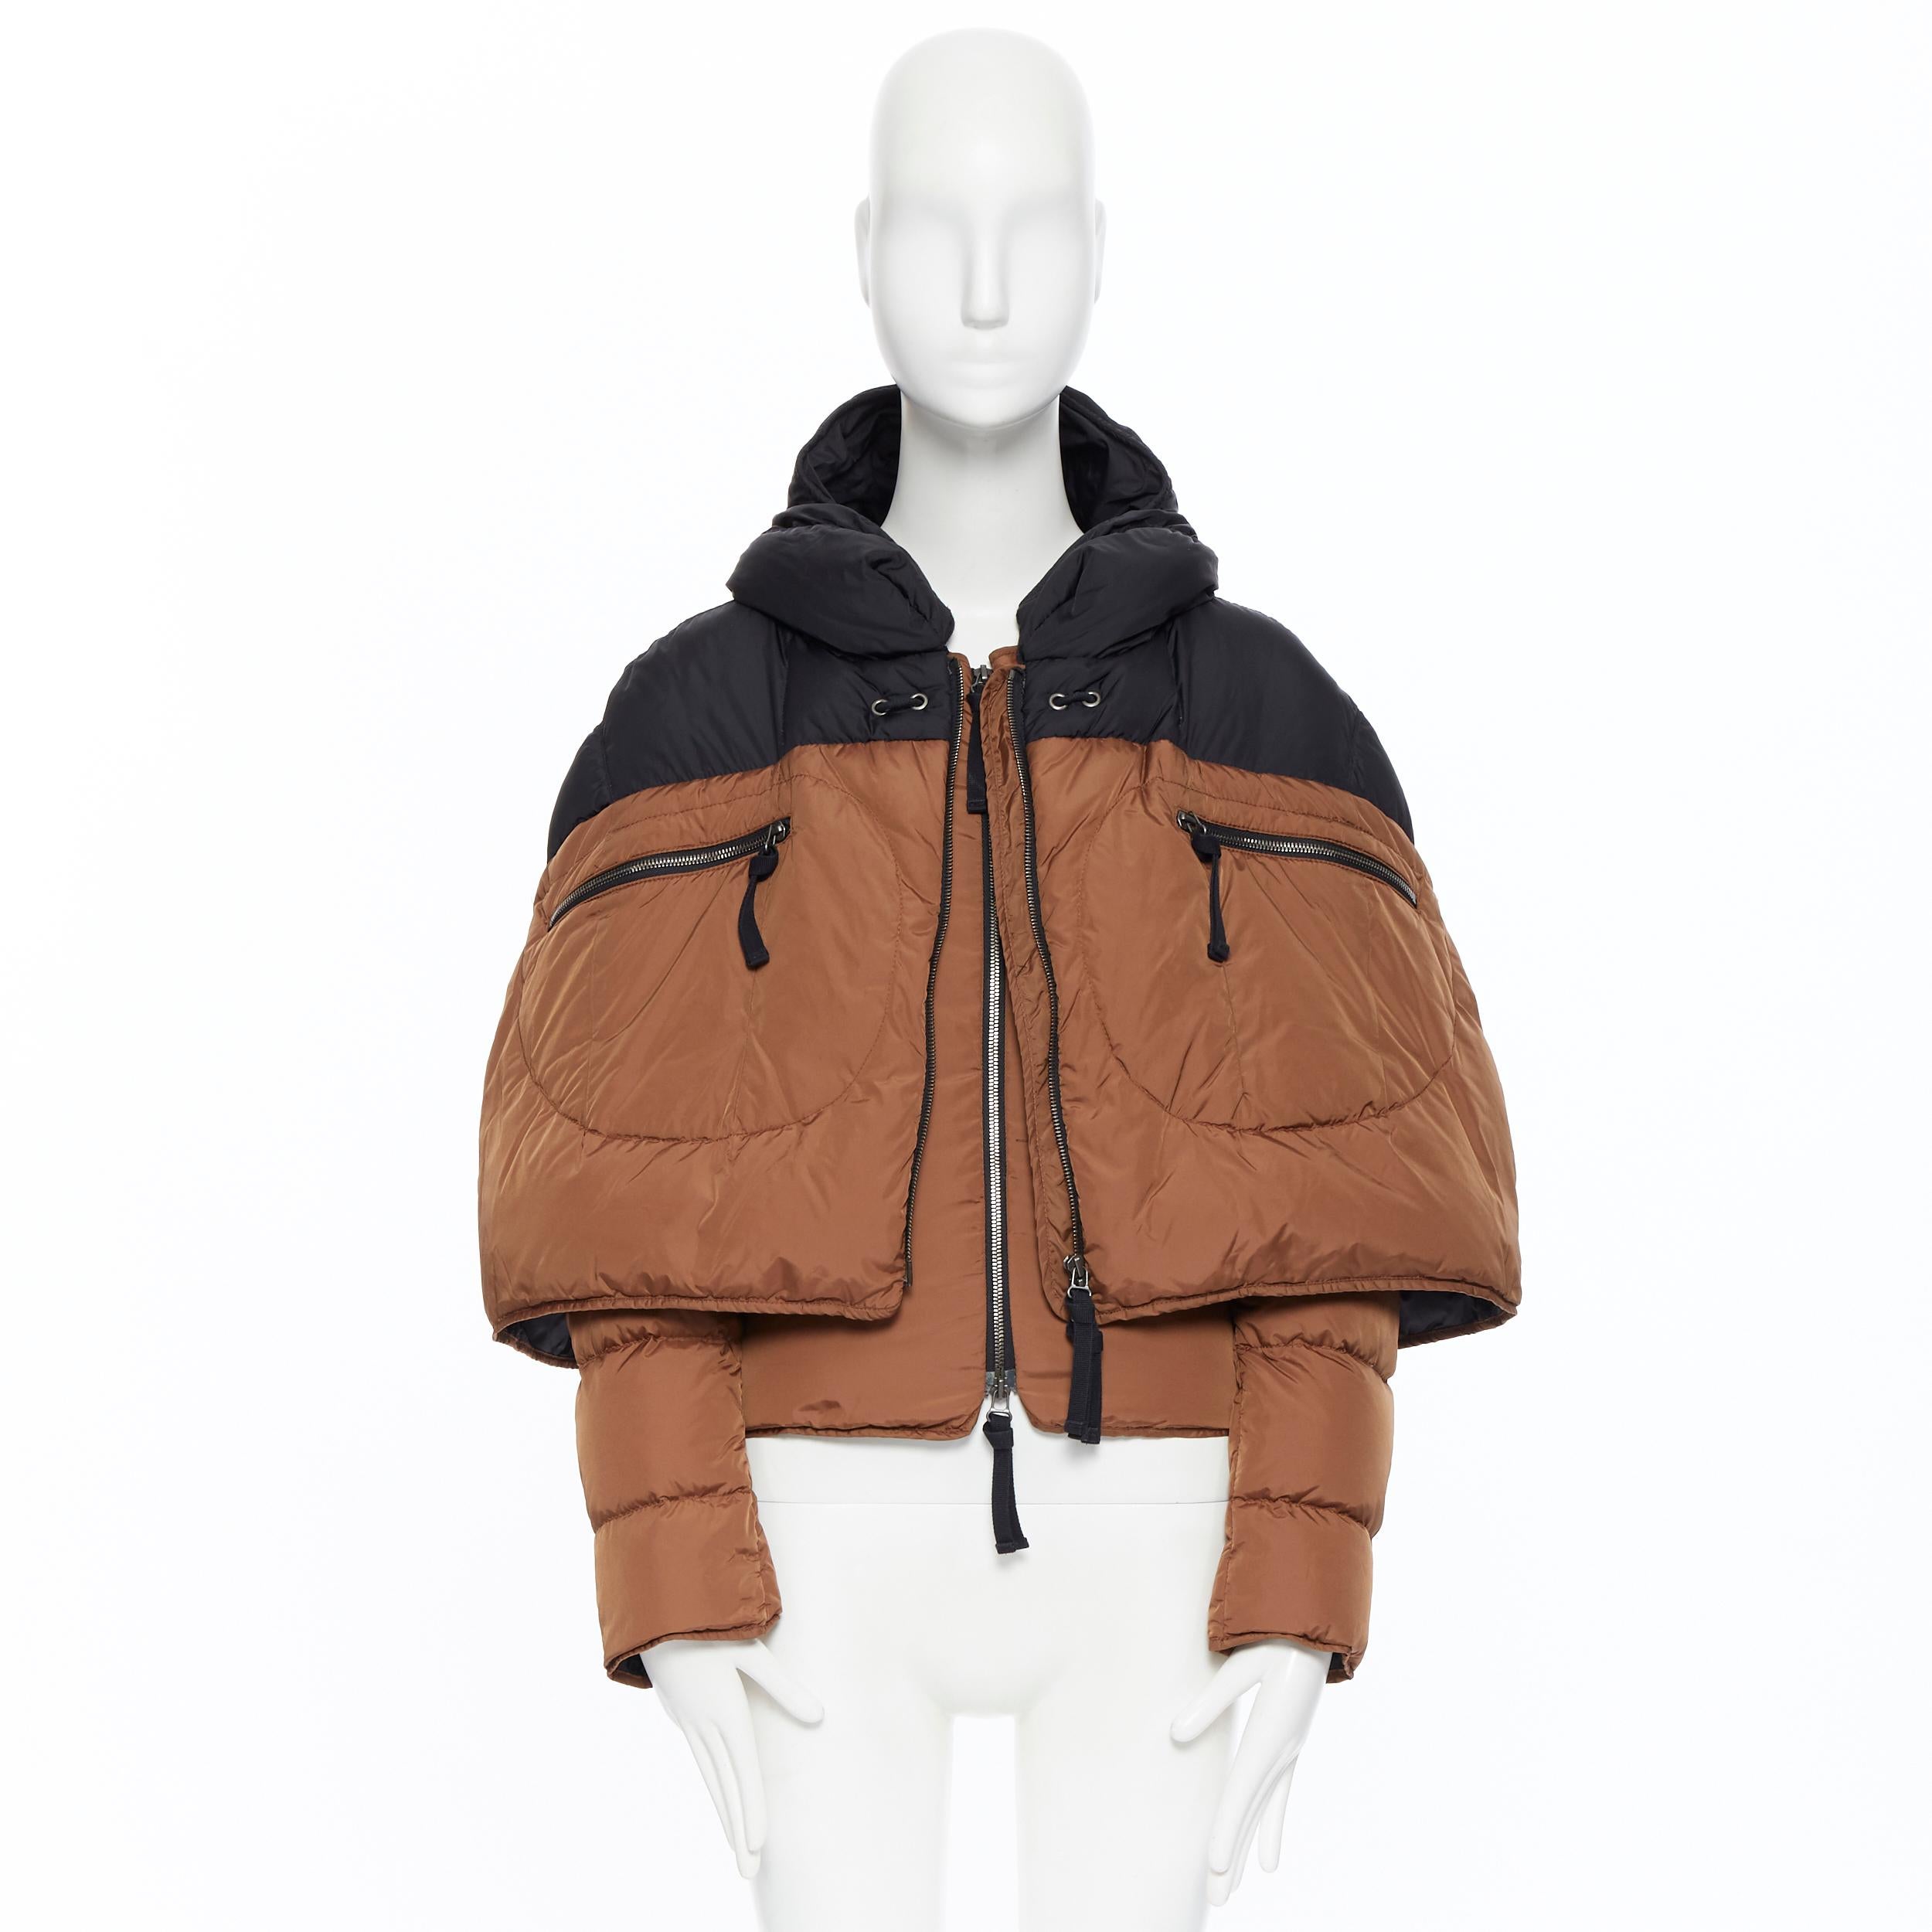 MARNI AW11 brown black colorblocked cape layered down feather padded jacket IT38
Brand: Marni
Model Name / Style: Down jacket
Material: Polyamide
Color: Brown and black
Pattern: Solid
Closure: Zip
Extra Detail: Cape layered. Hooded. Dual zipper